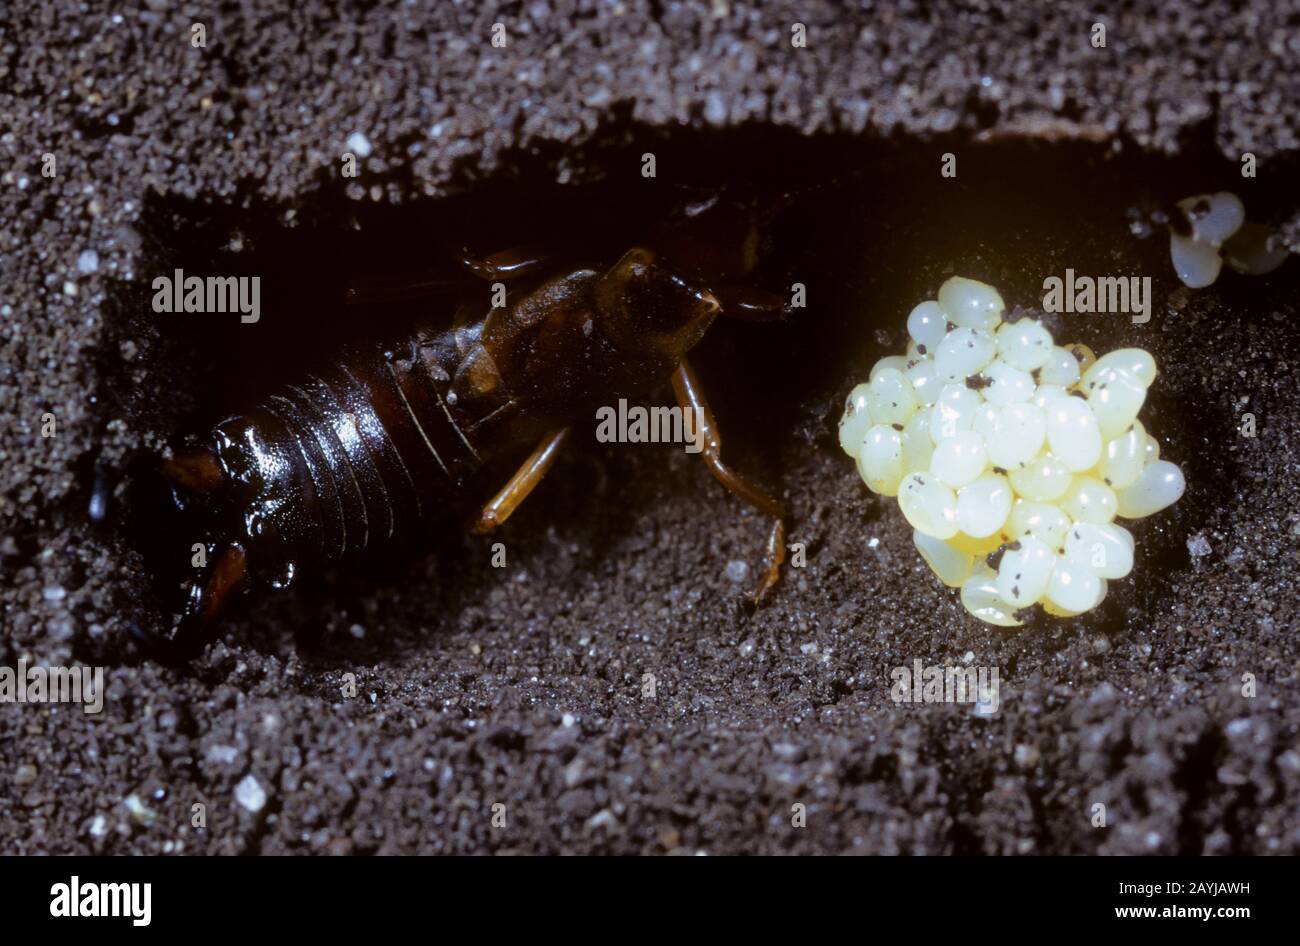 common earwig, European earwig (Forficula auricularia), in the nest with eggs, Germany Stock Photo